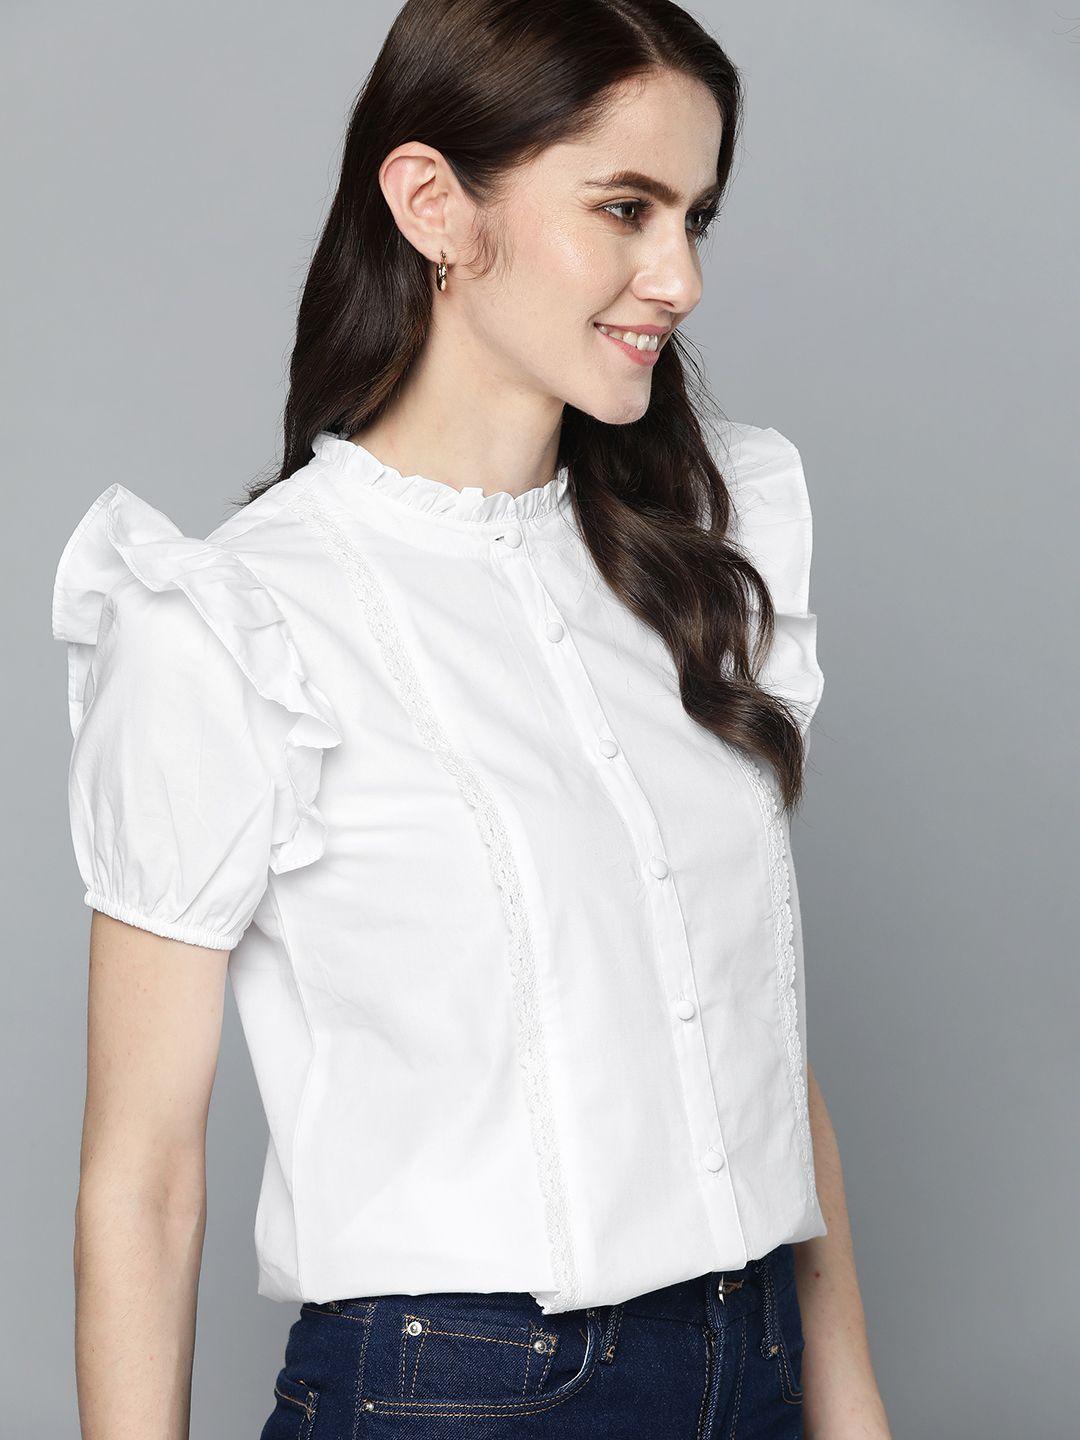 mast & harbour white solid pure cotton puff sleeve shirt style top with lace insert detail